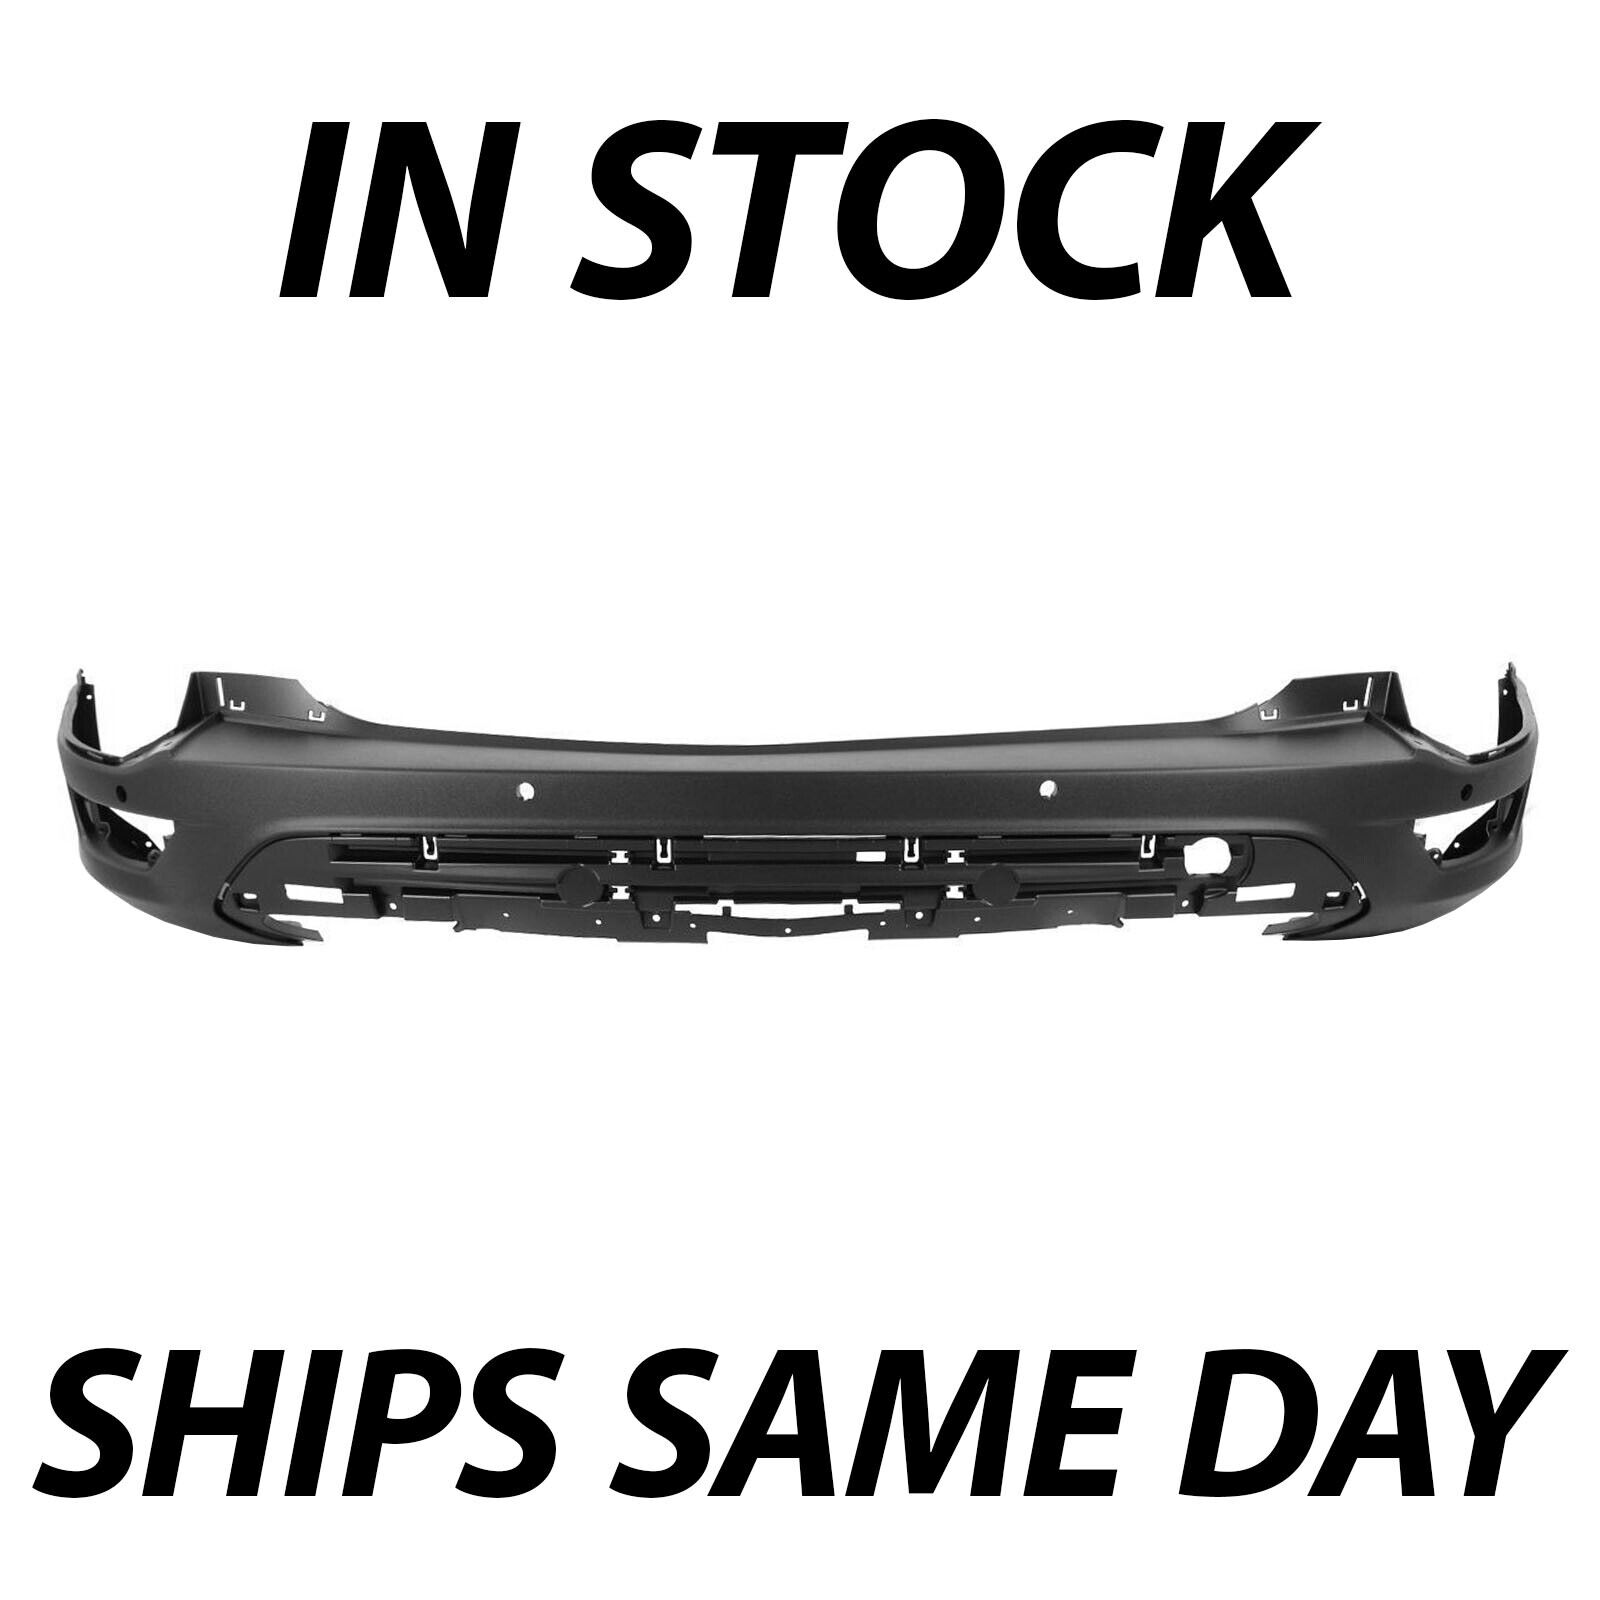 New Textured Black - Rear Bumper Cover Replacement For 2013-2016 Ford Escape